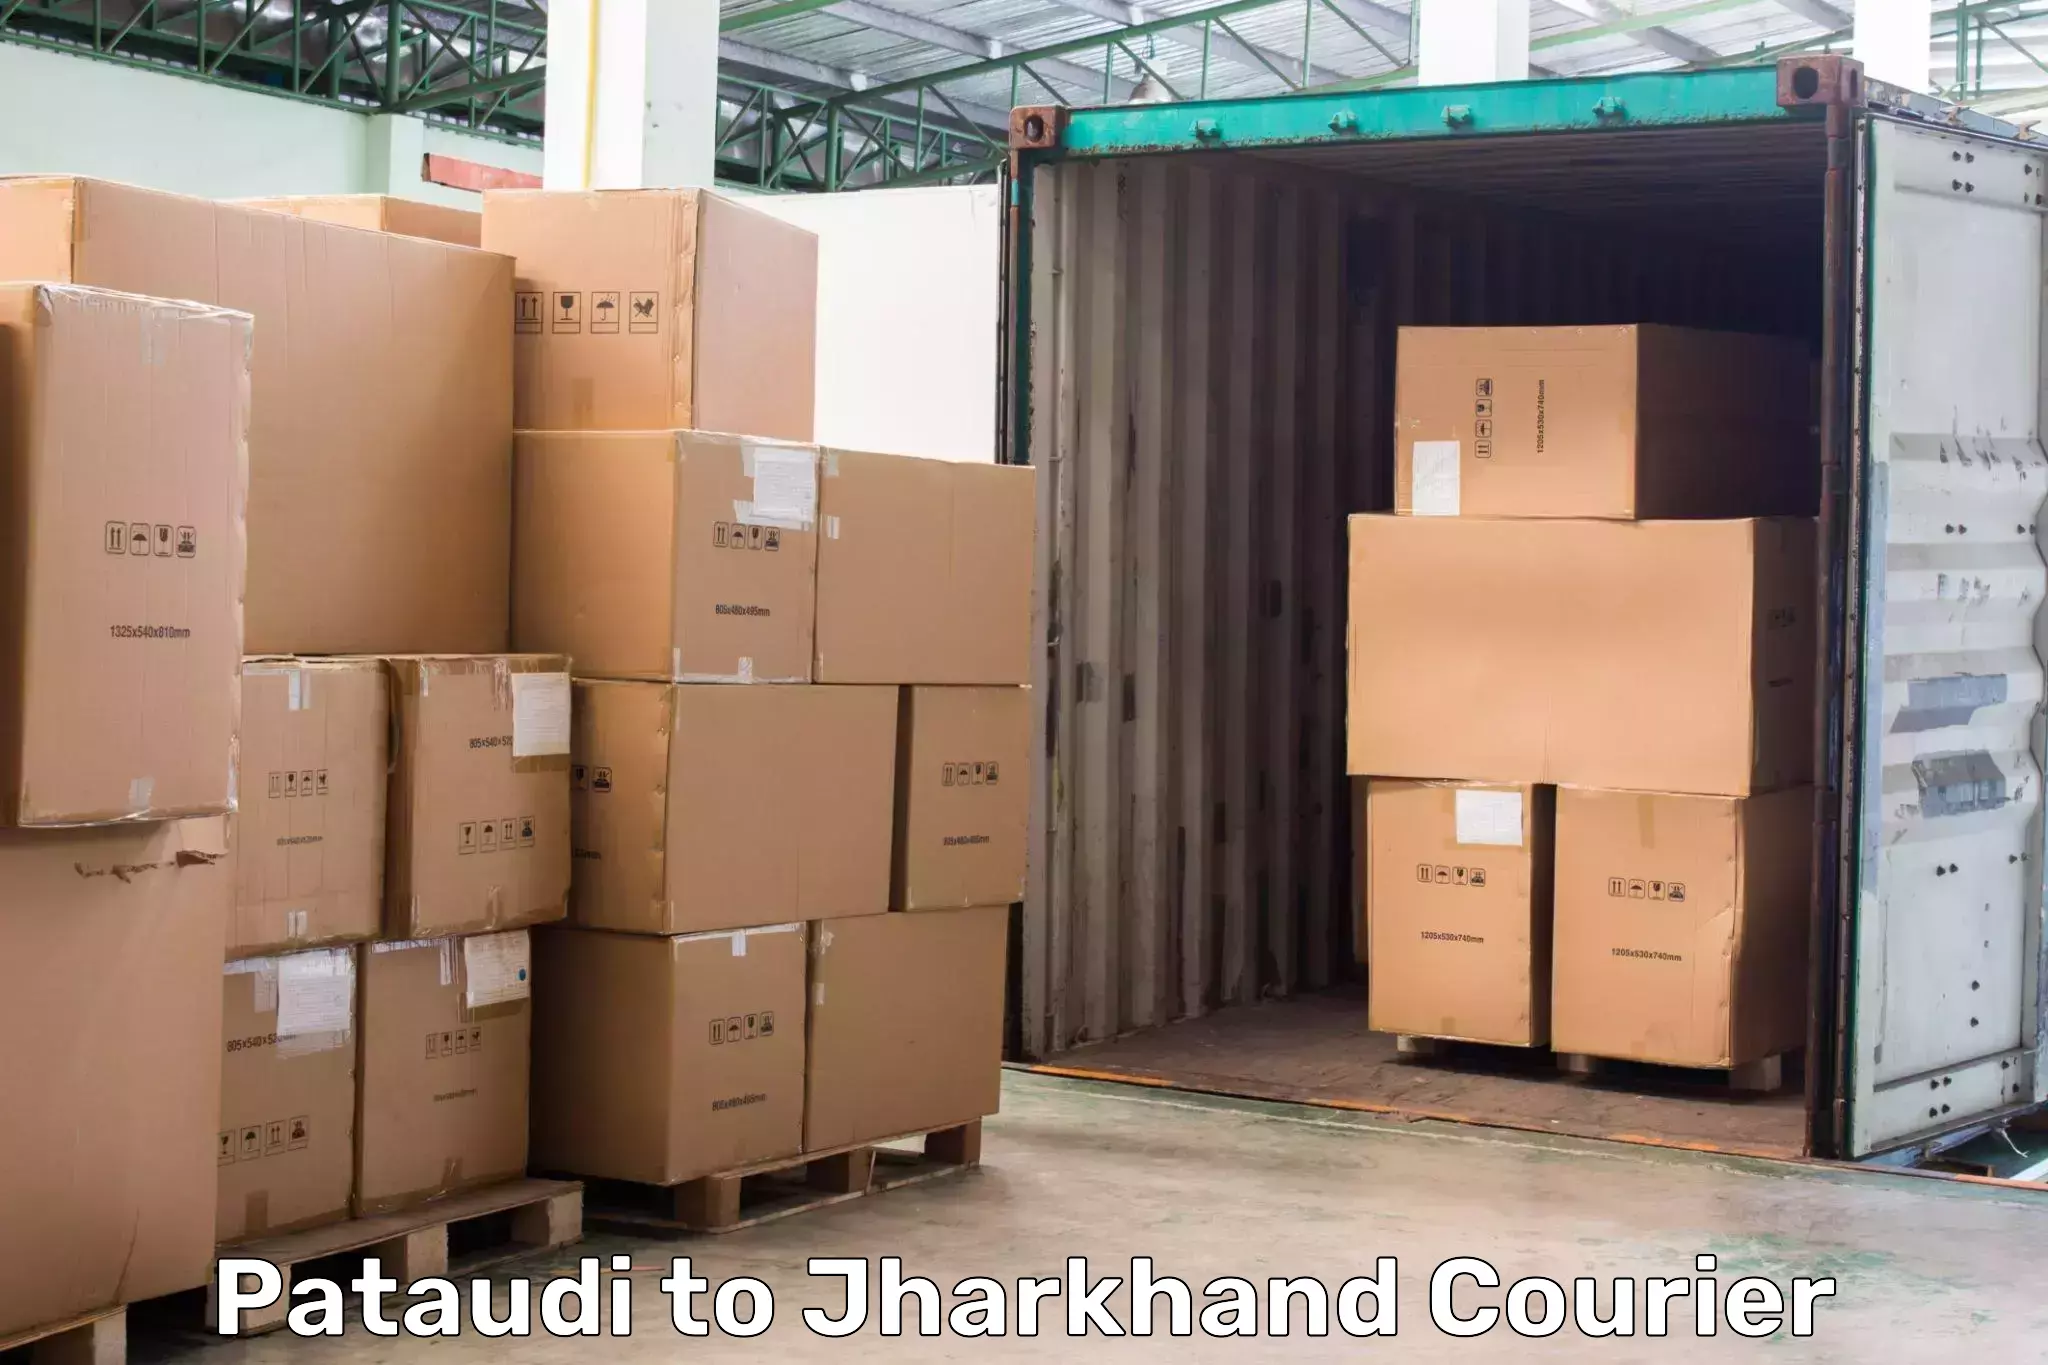 Package delivery network Pataudi to Jharkhand